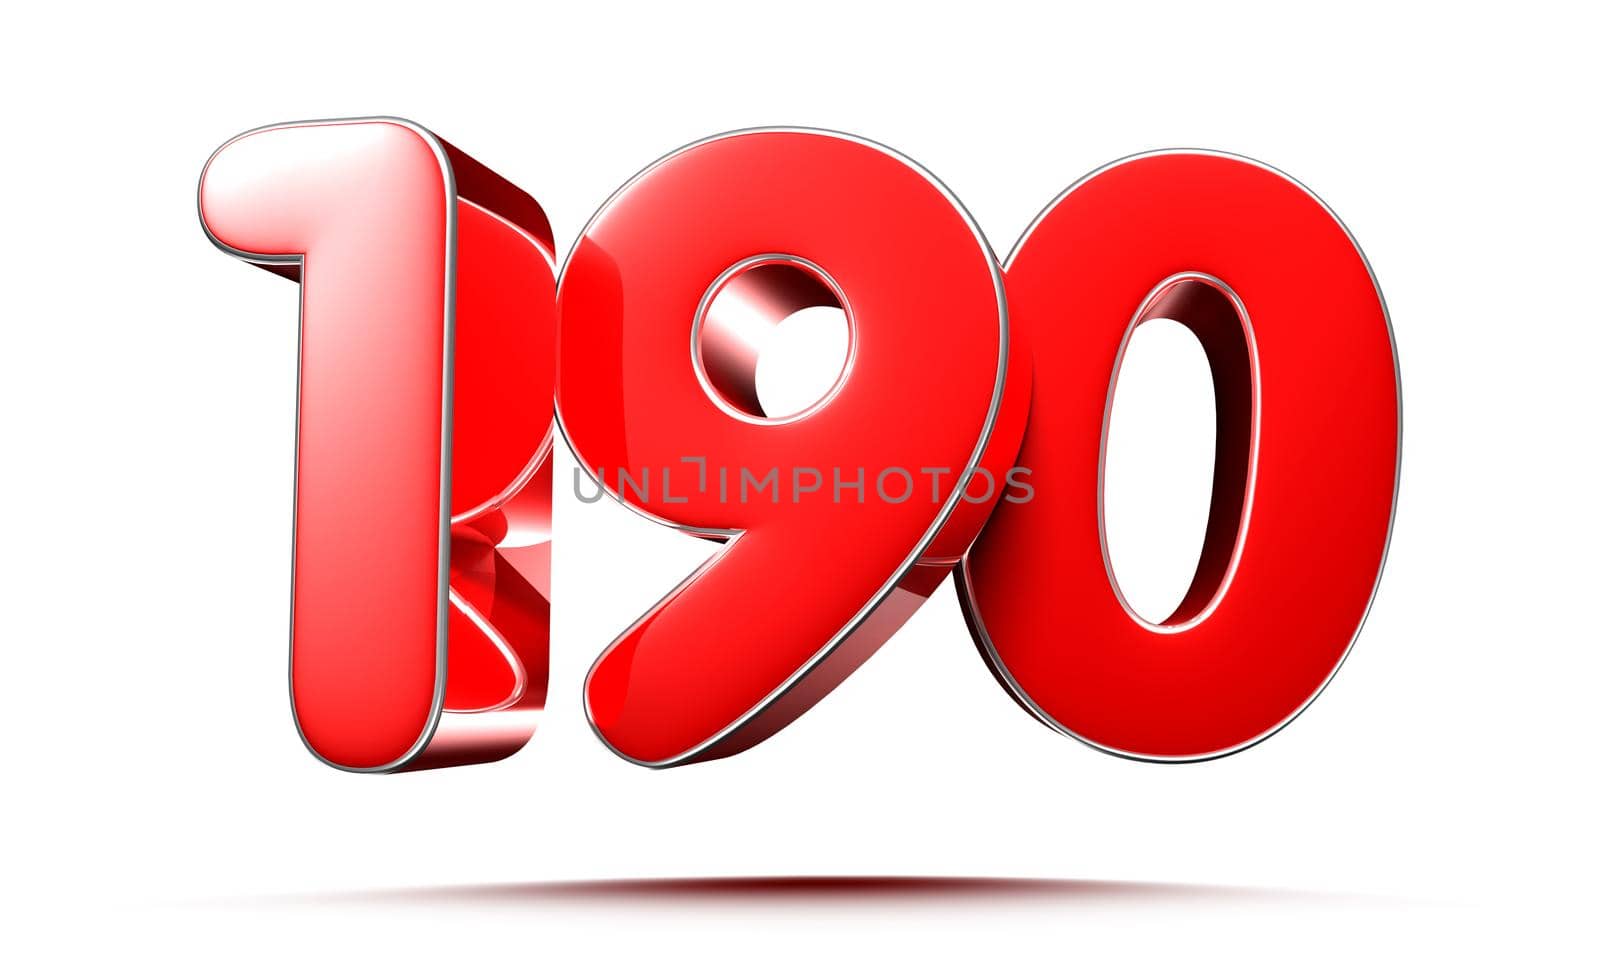 Rounded red numbers 190 on white background 3D illustration with clipping path by thitimontoyai